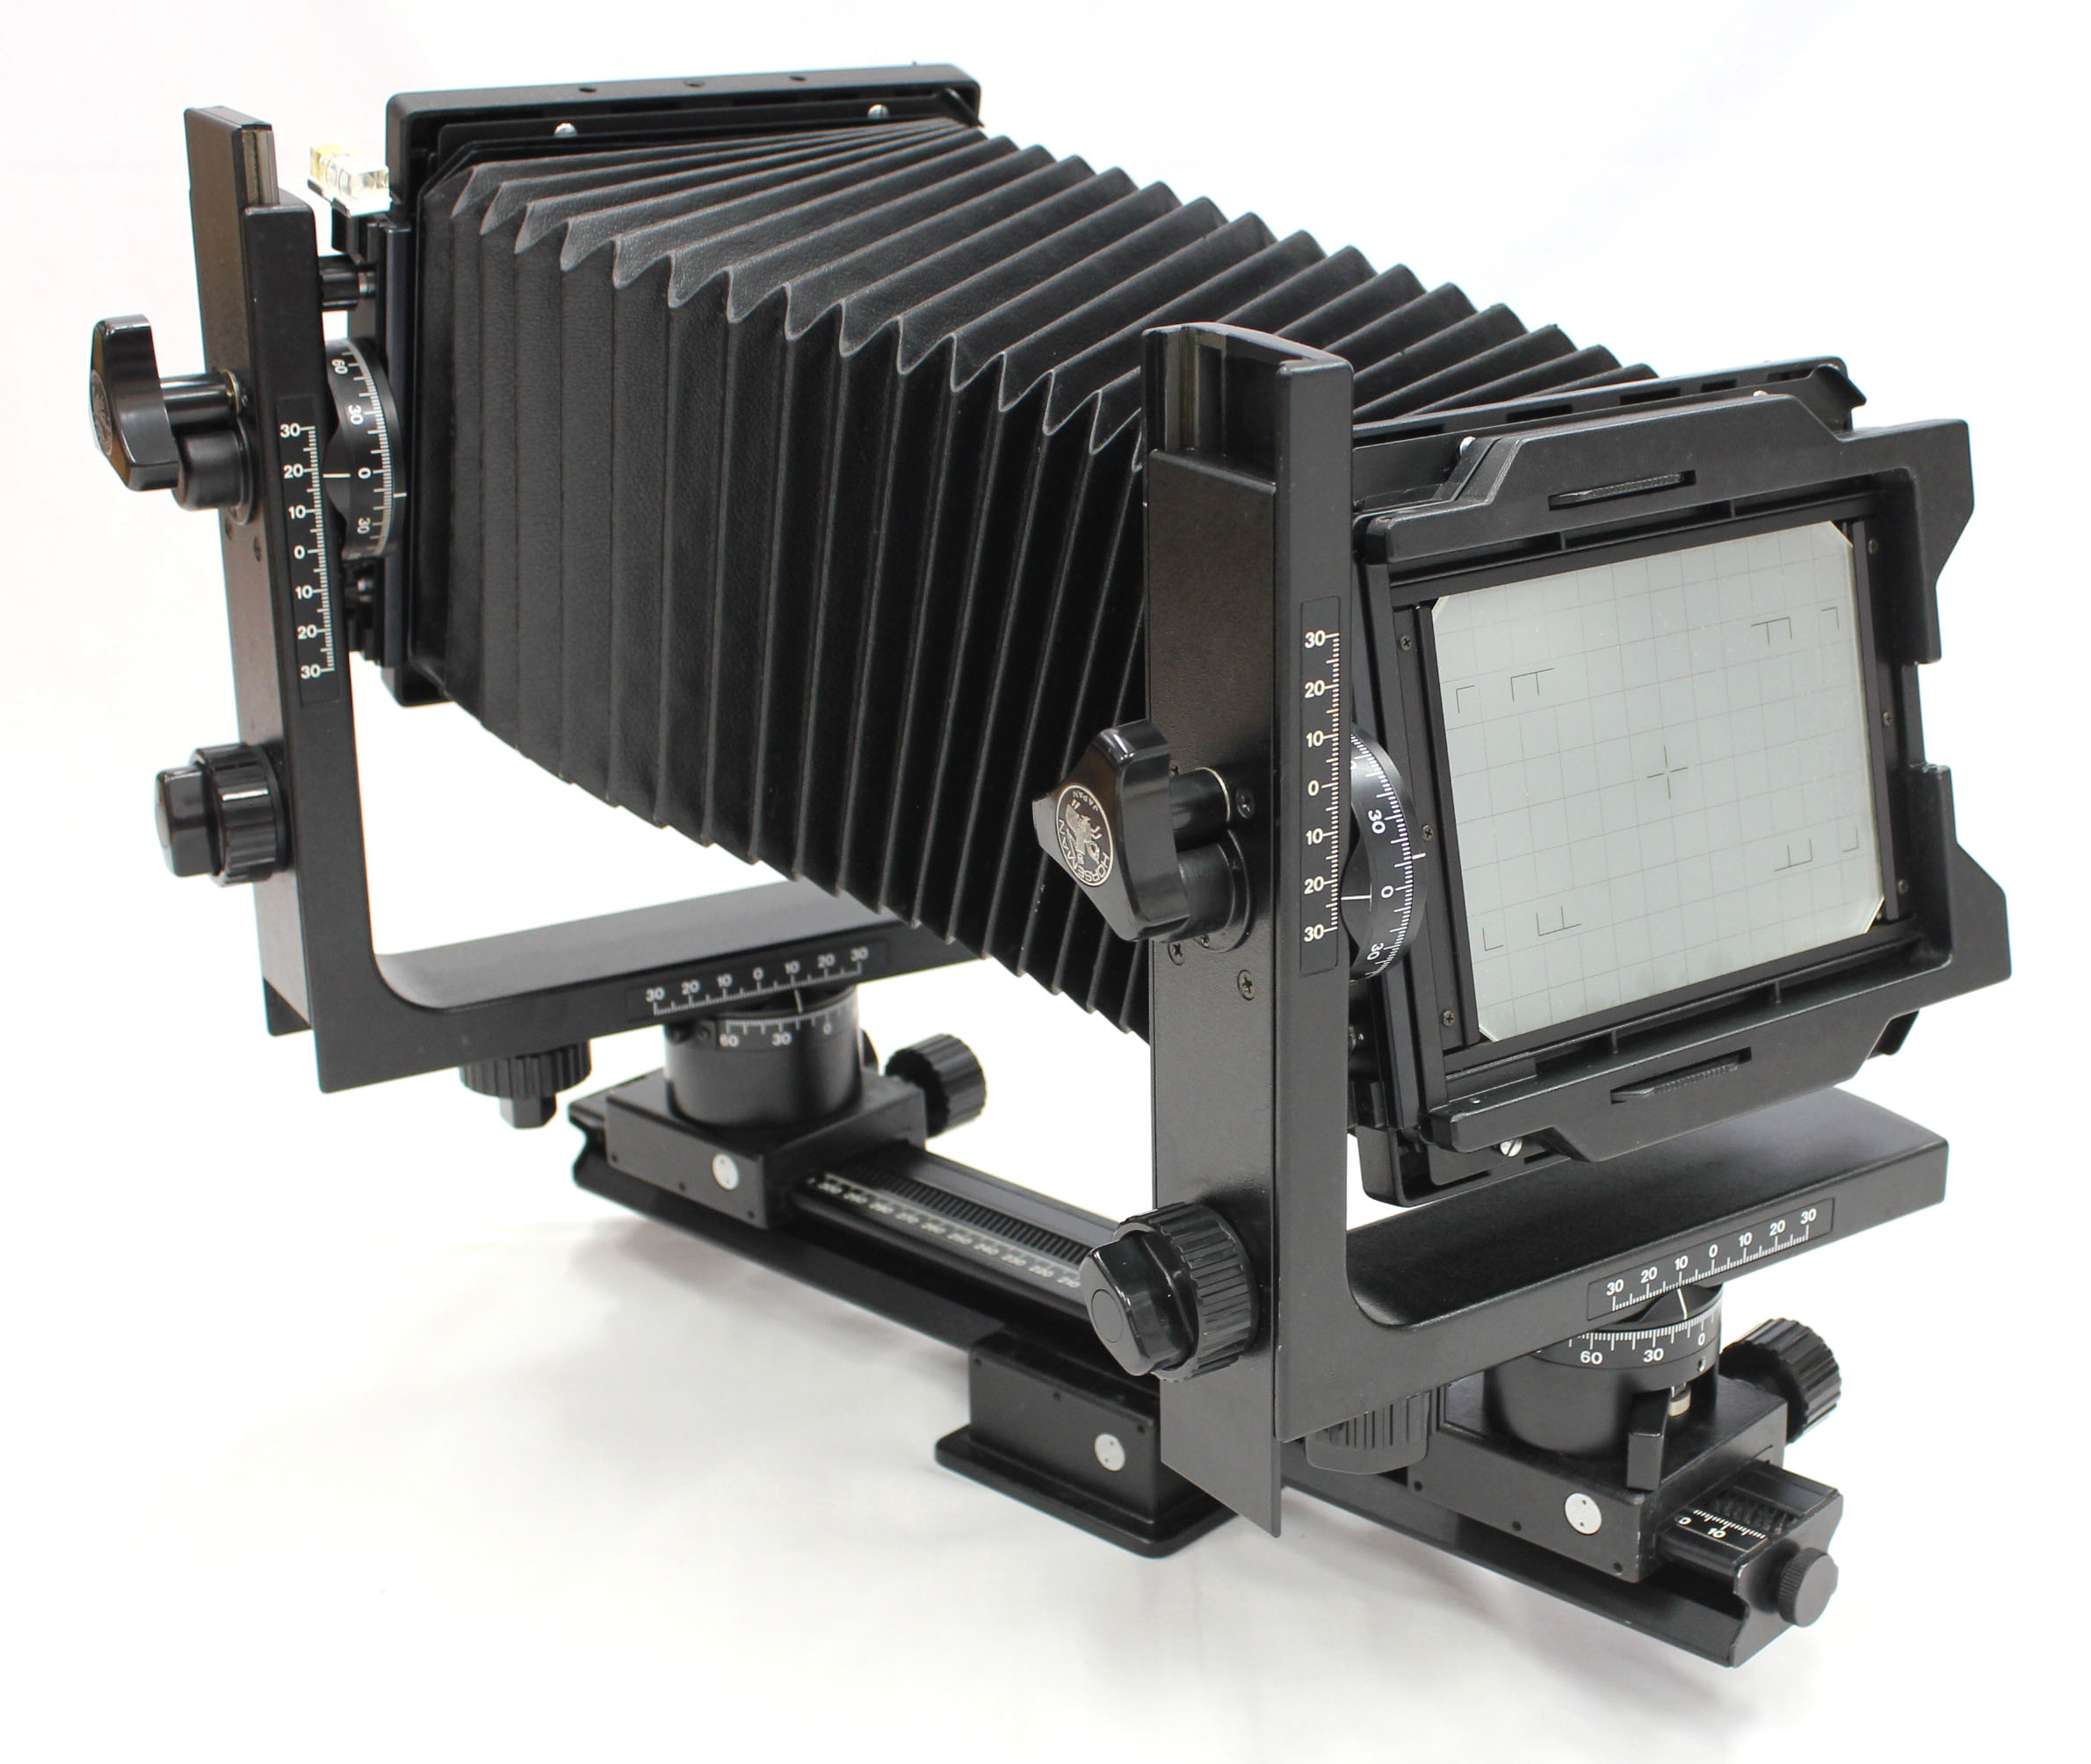 Horseman L45 4x5 Large Format View Type Monorail Camera with 3 Cut Film Holders from Japan Photo 9